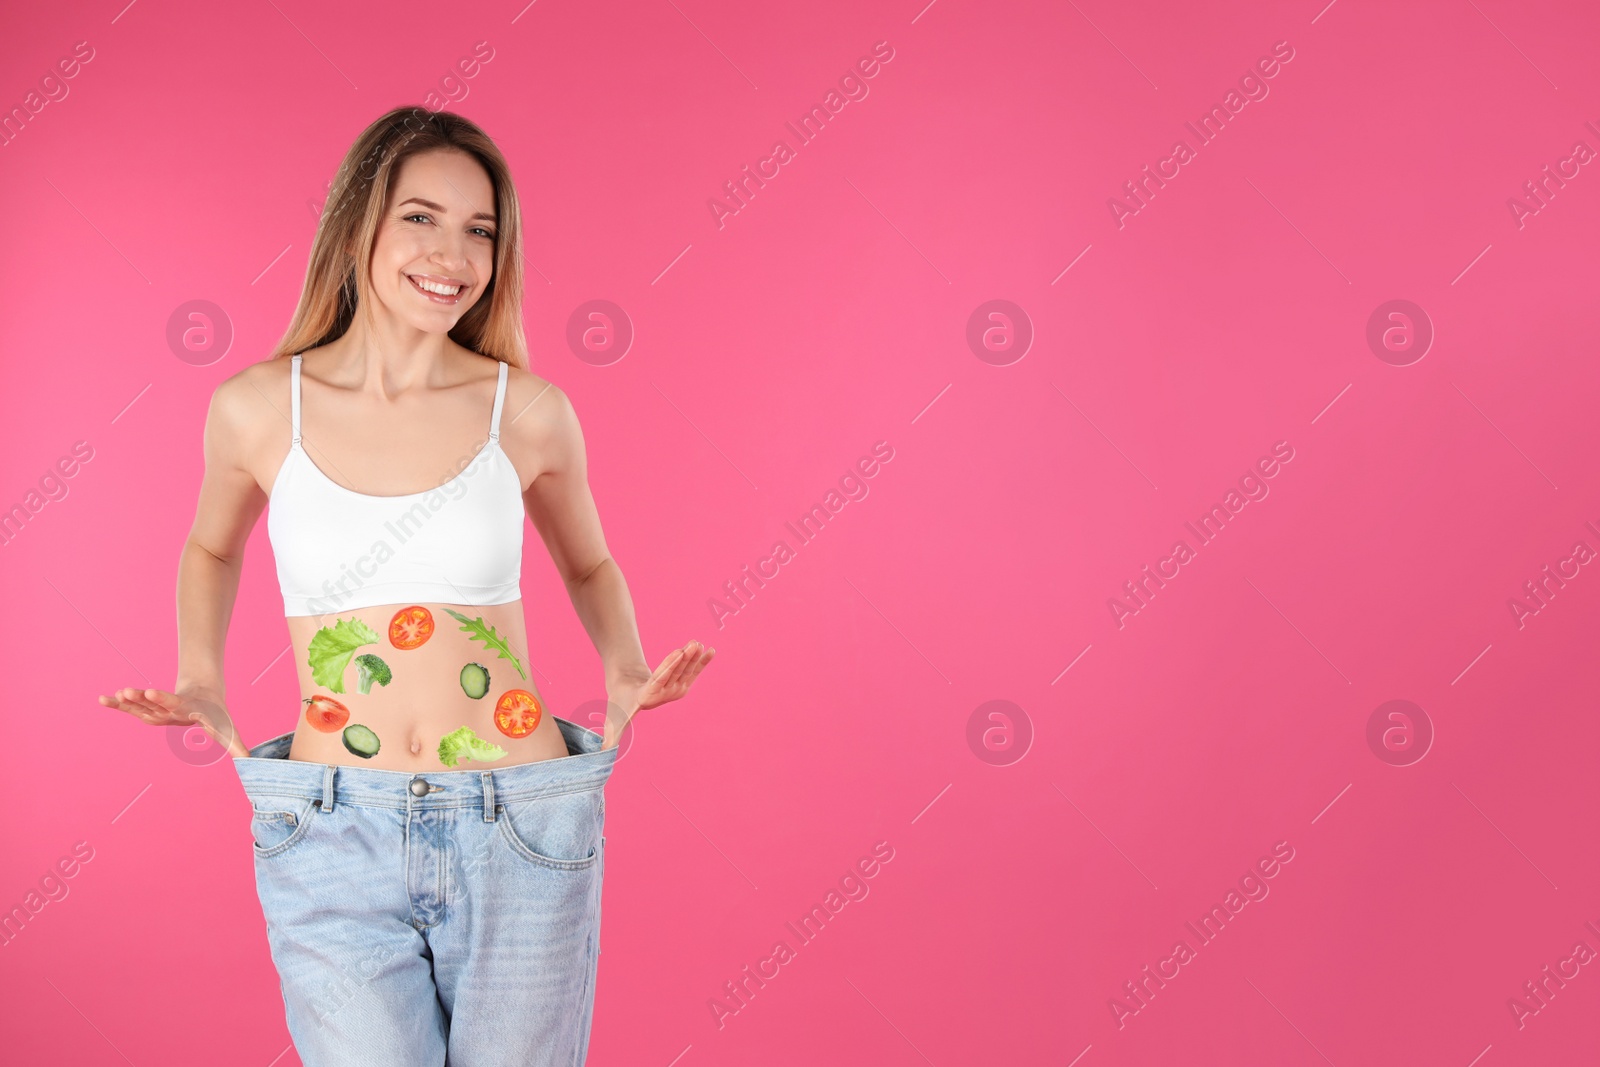 Image of Slim woman in oversized jeans and images of vegetables on her belly against pink background. Healthy eating